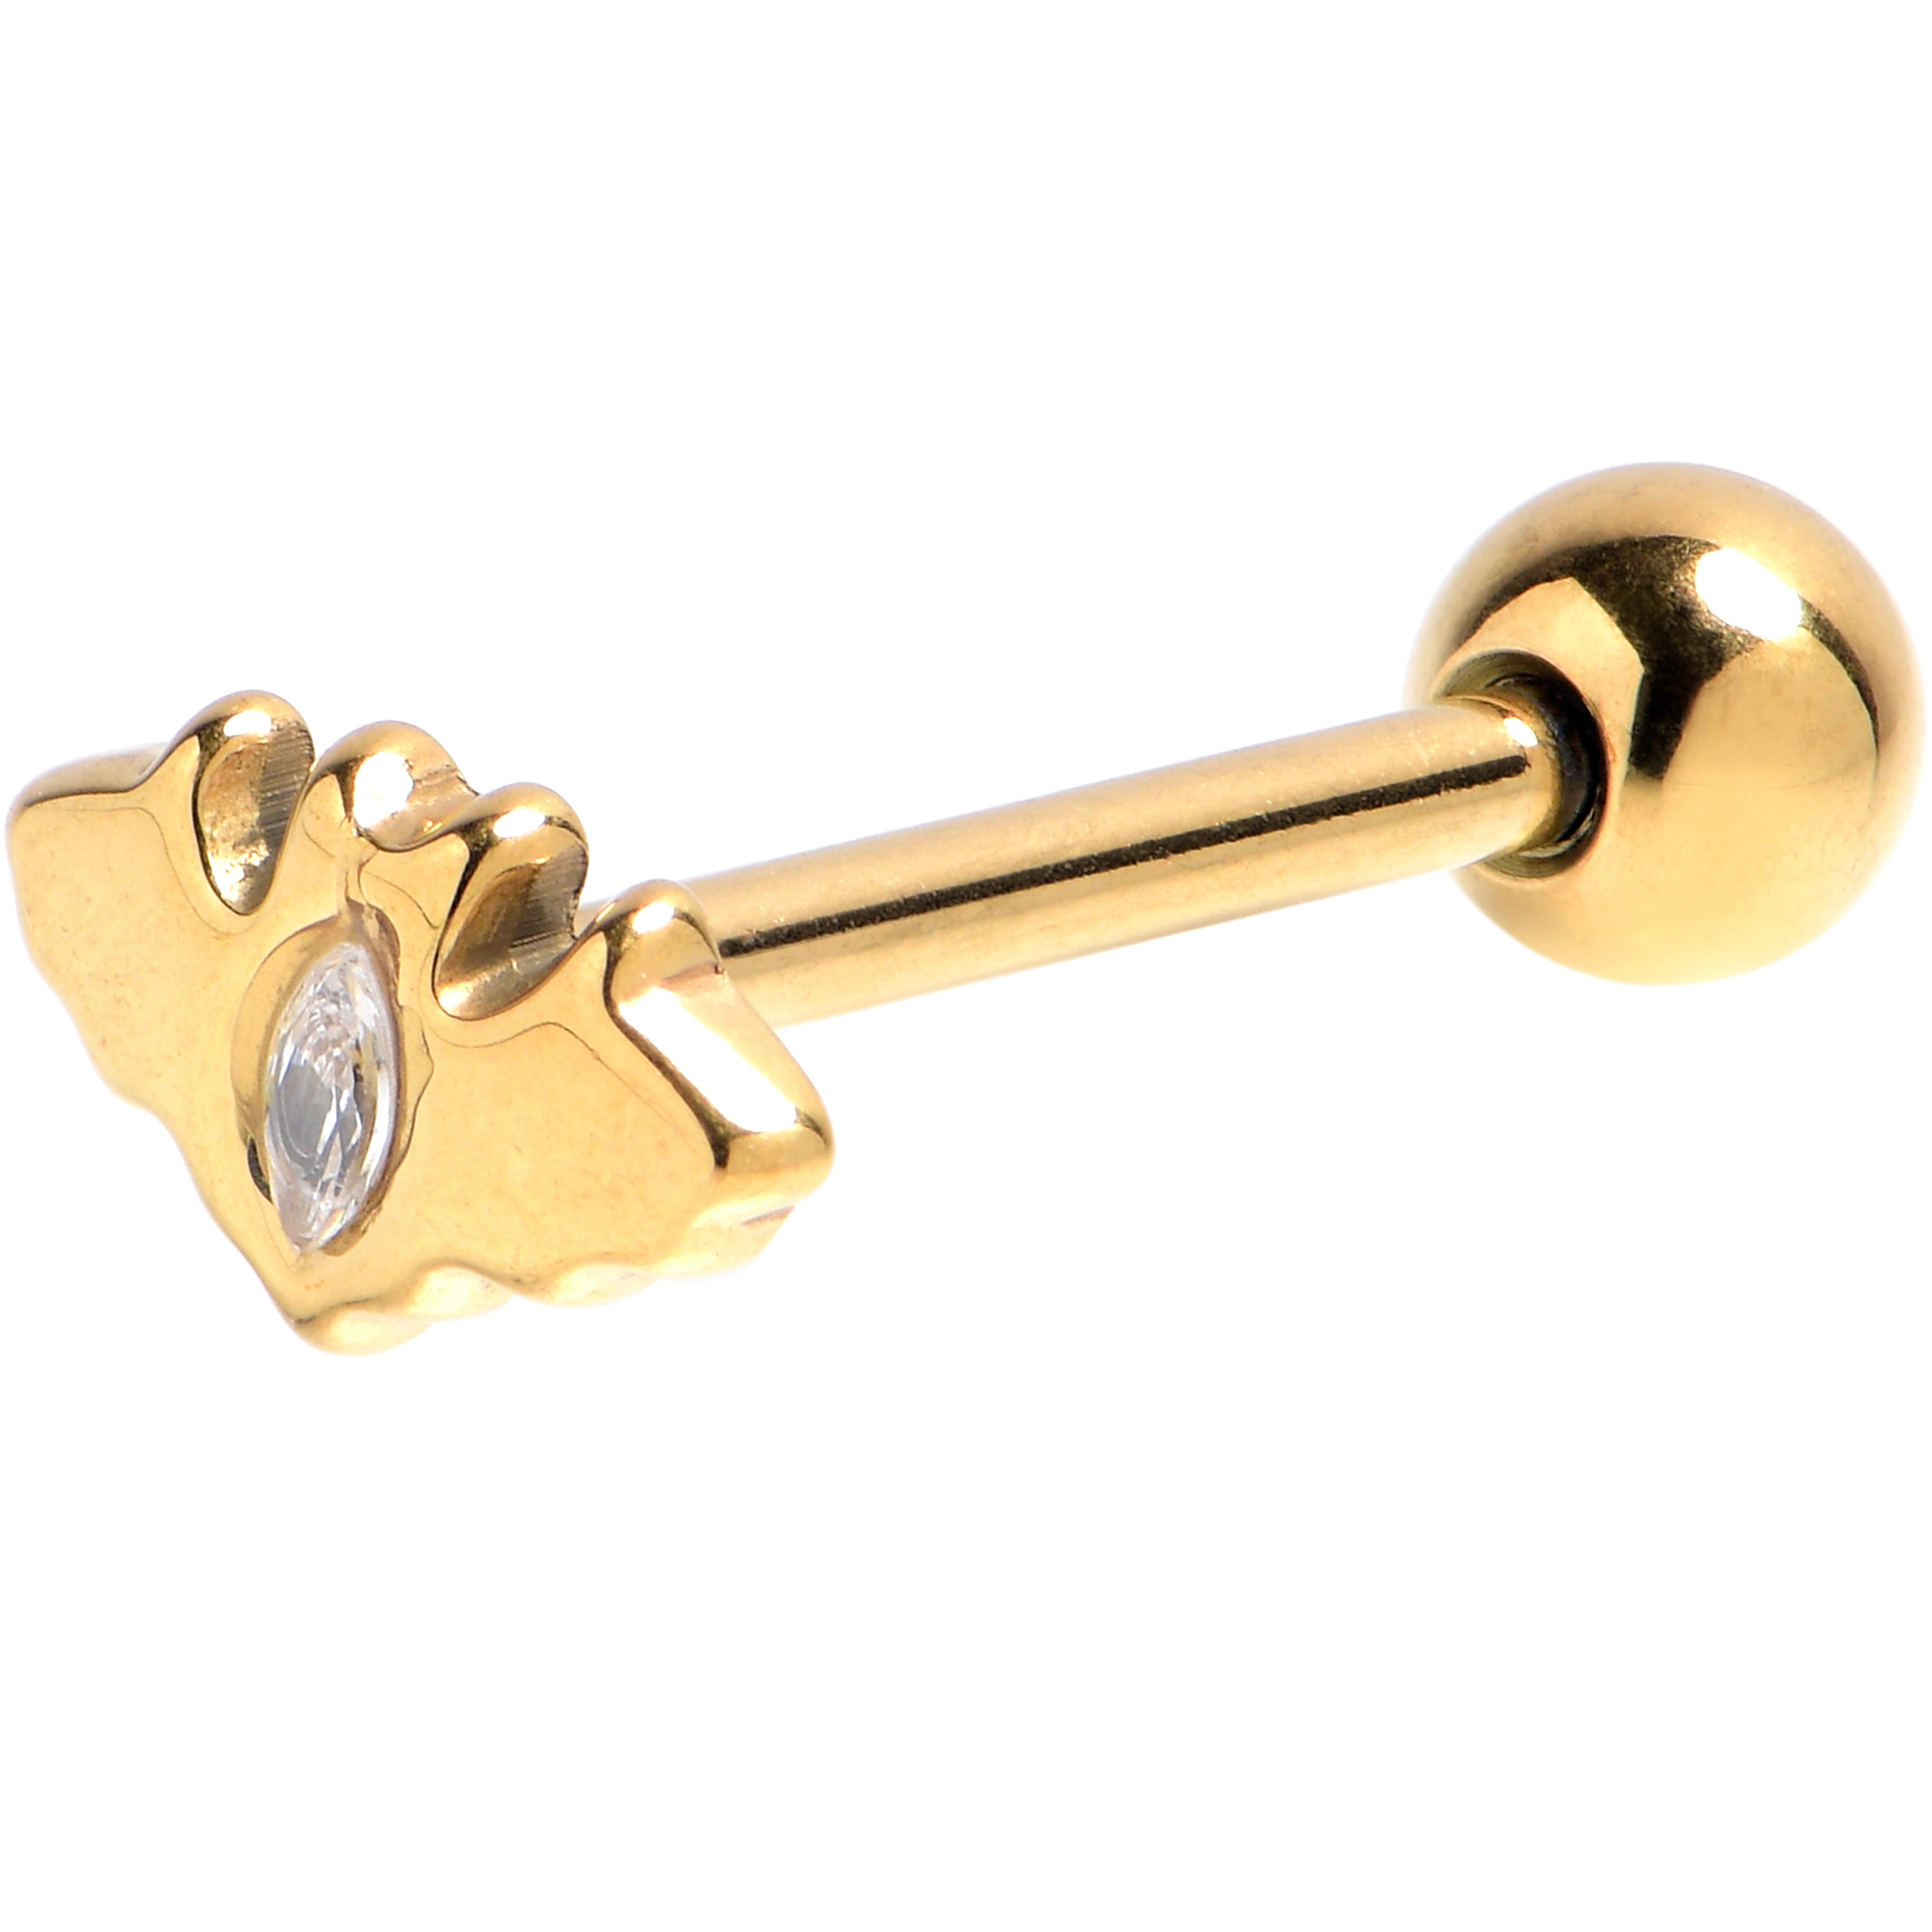 Clear CZ Gem Gold Tone Swooping Bat Barbell Tongue Ring